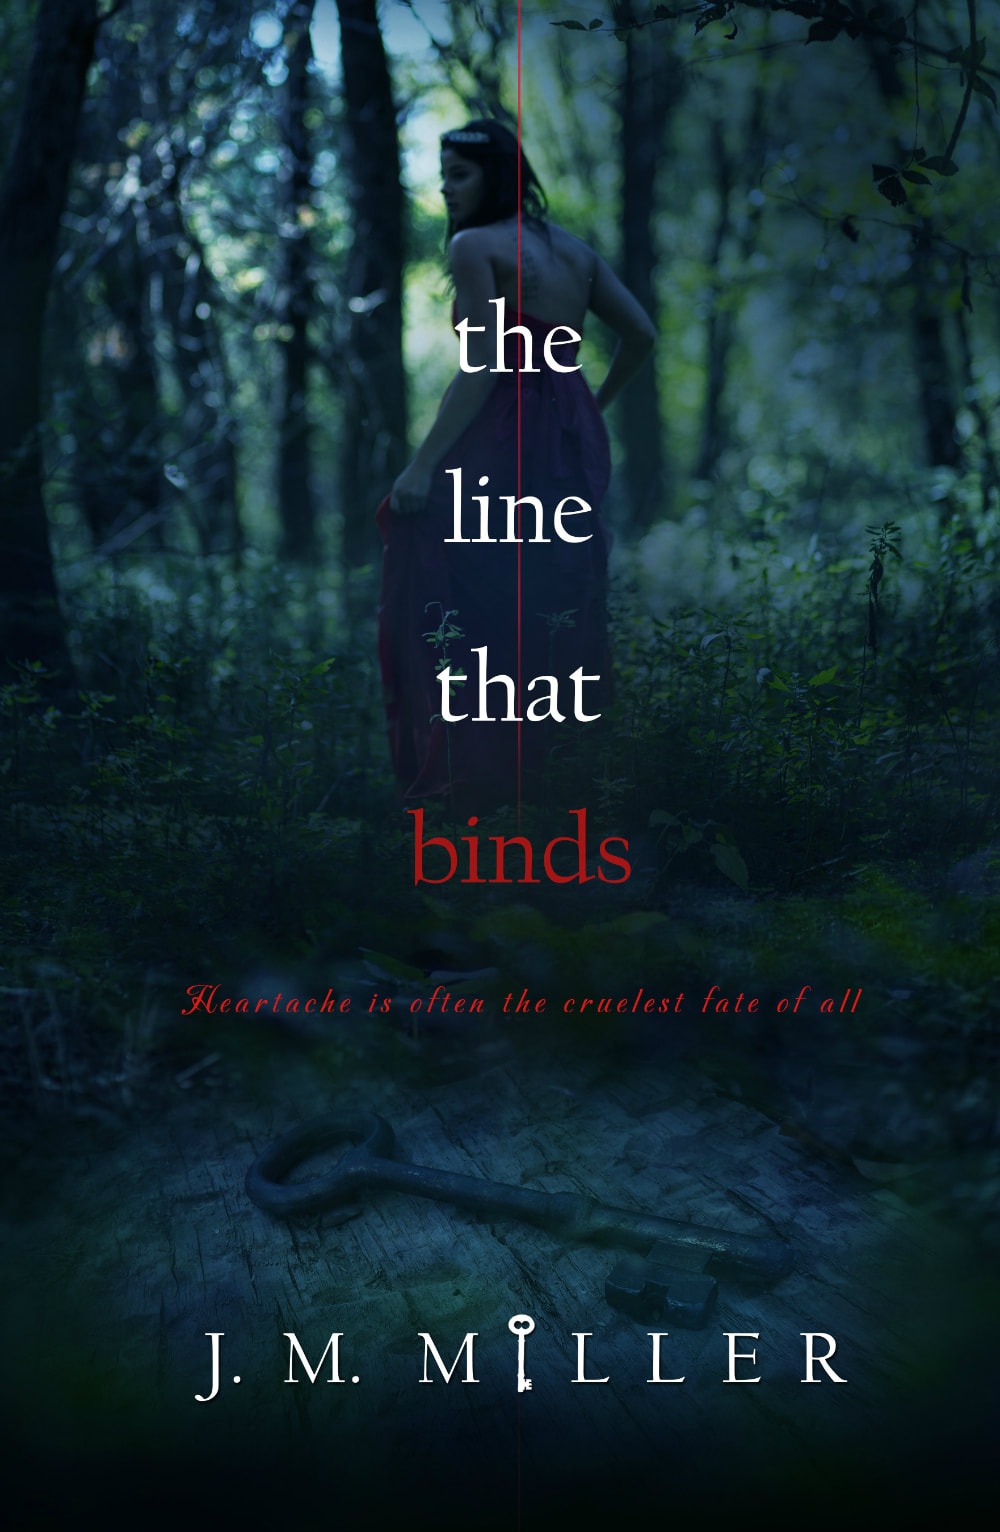 The Line That Binds - J.M. Miller